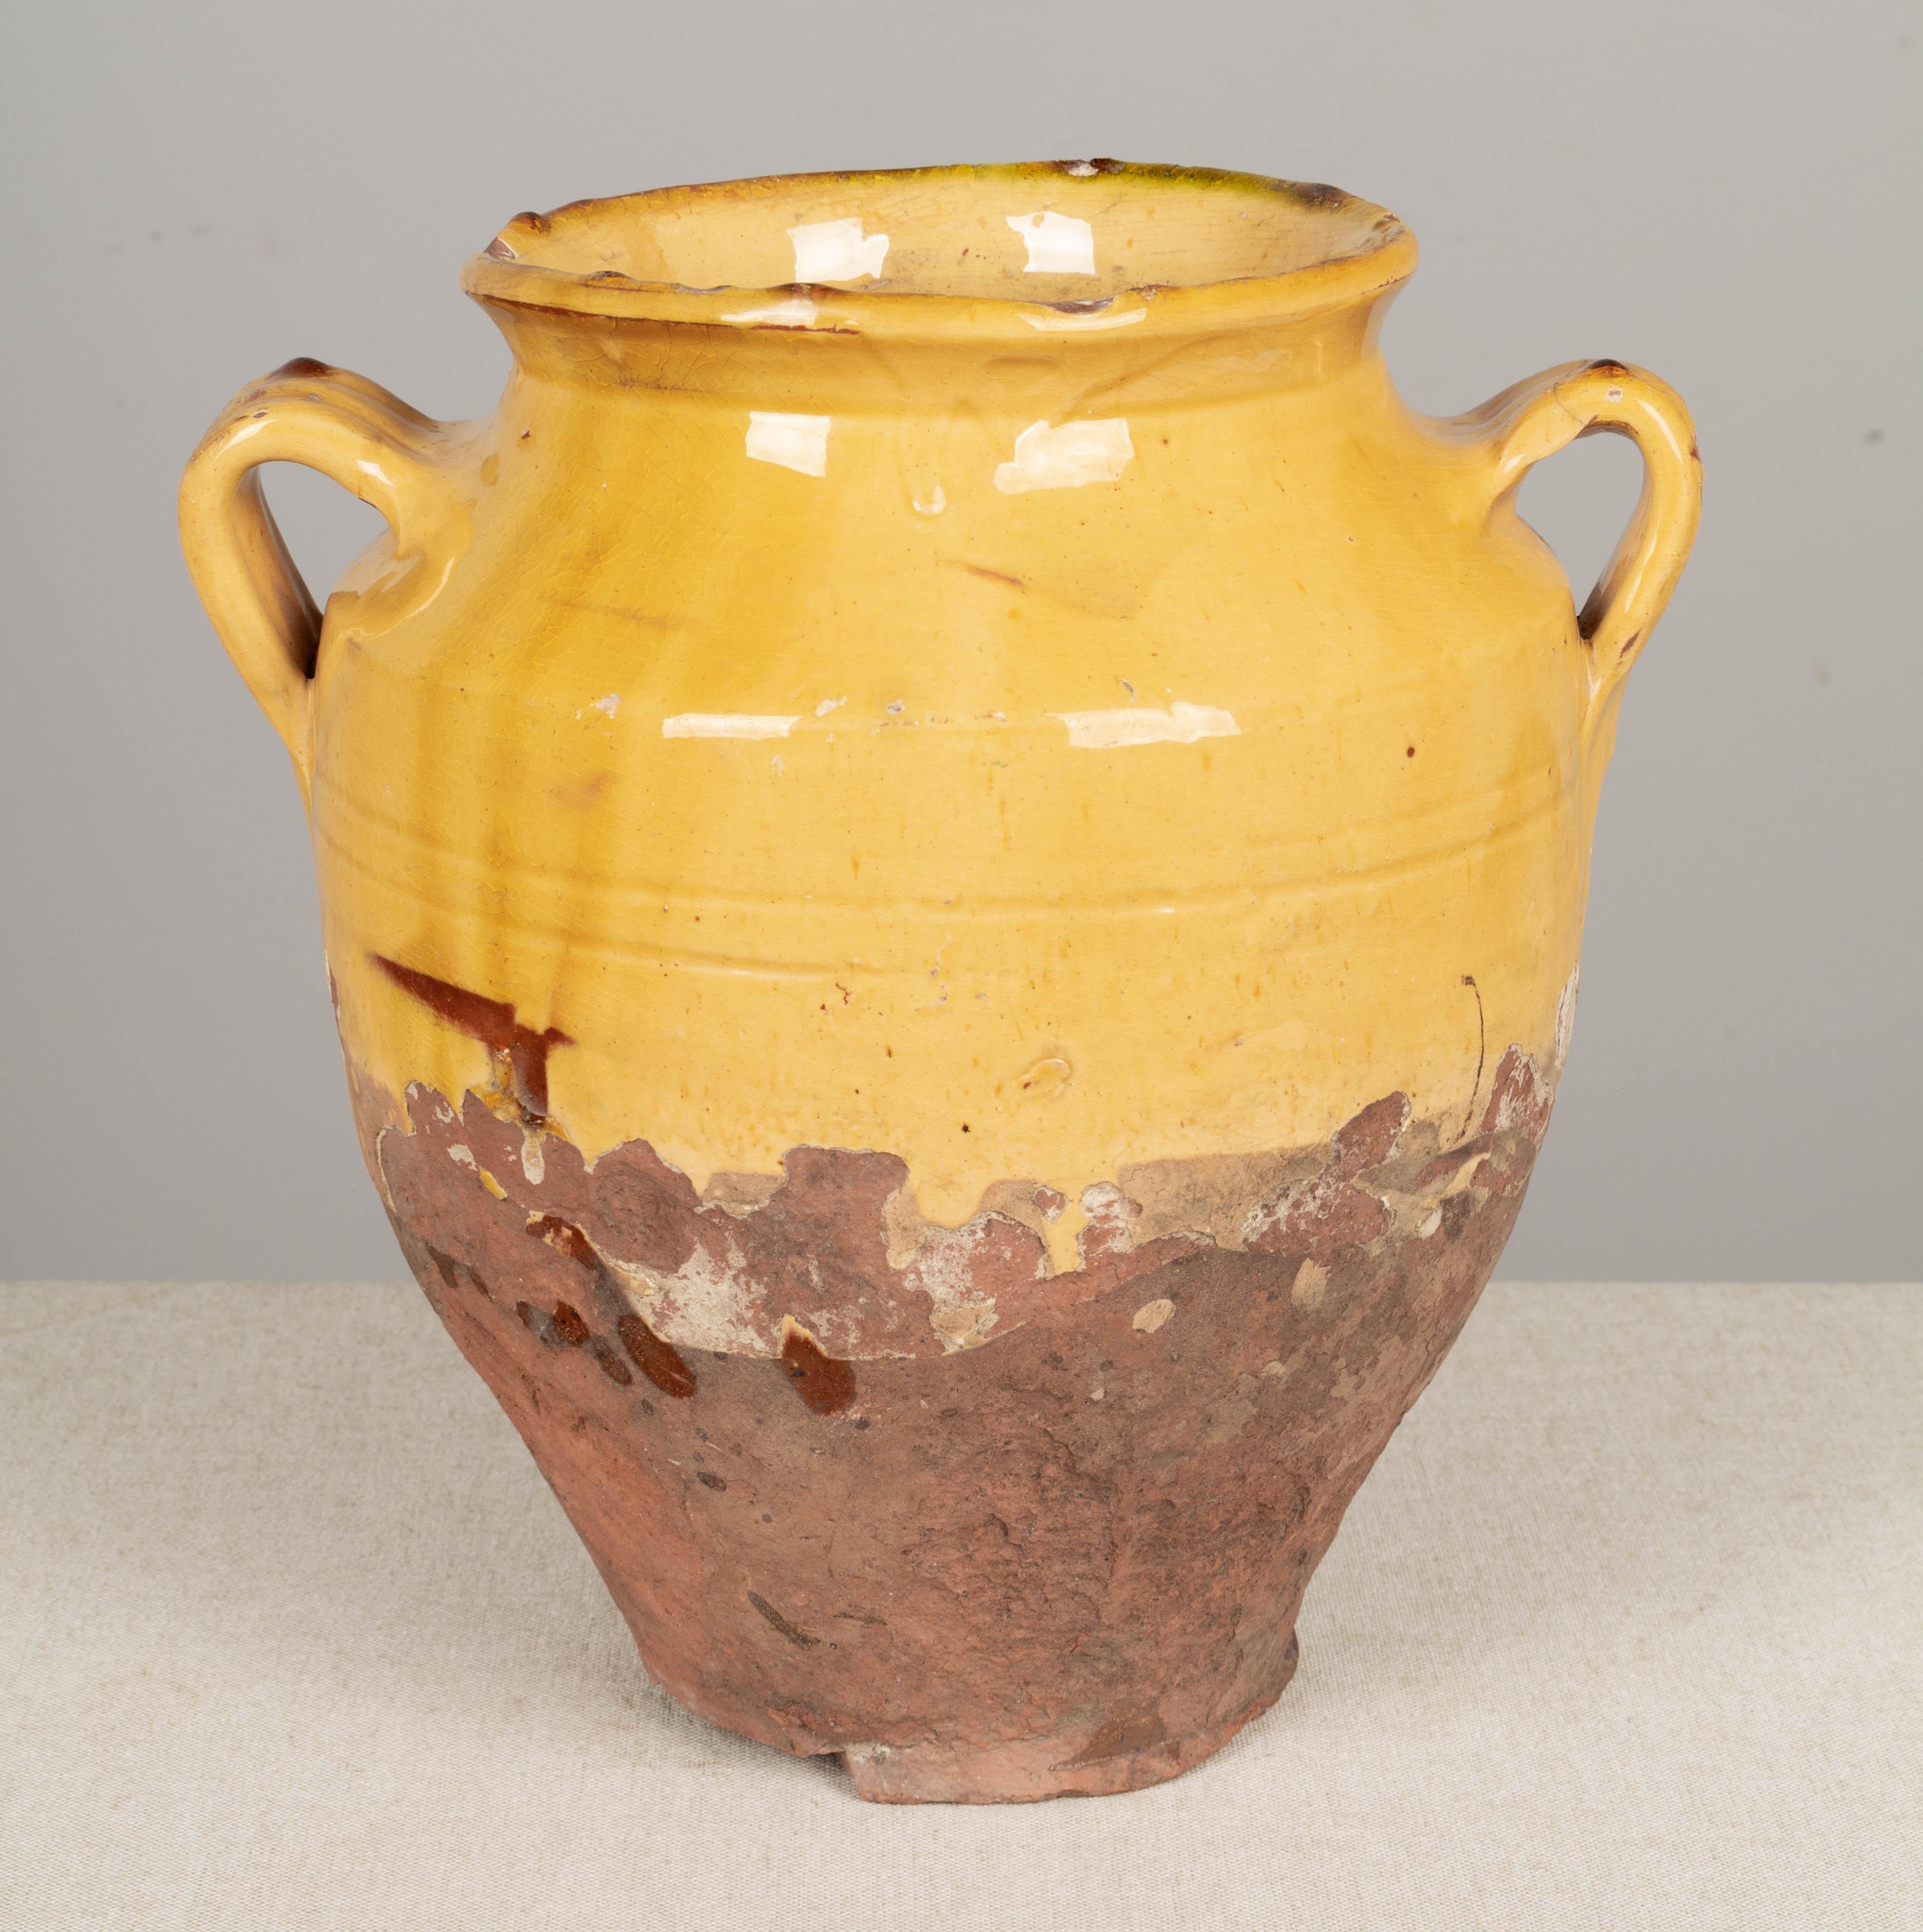 A 19th century earthenware confit pot from the Southwest of France with traditional yellow glaze. Chips, cracks and losses to glaze. Large hole in bottom. These ordinary earthenware vessels were once used daily in the French country home and have